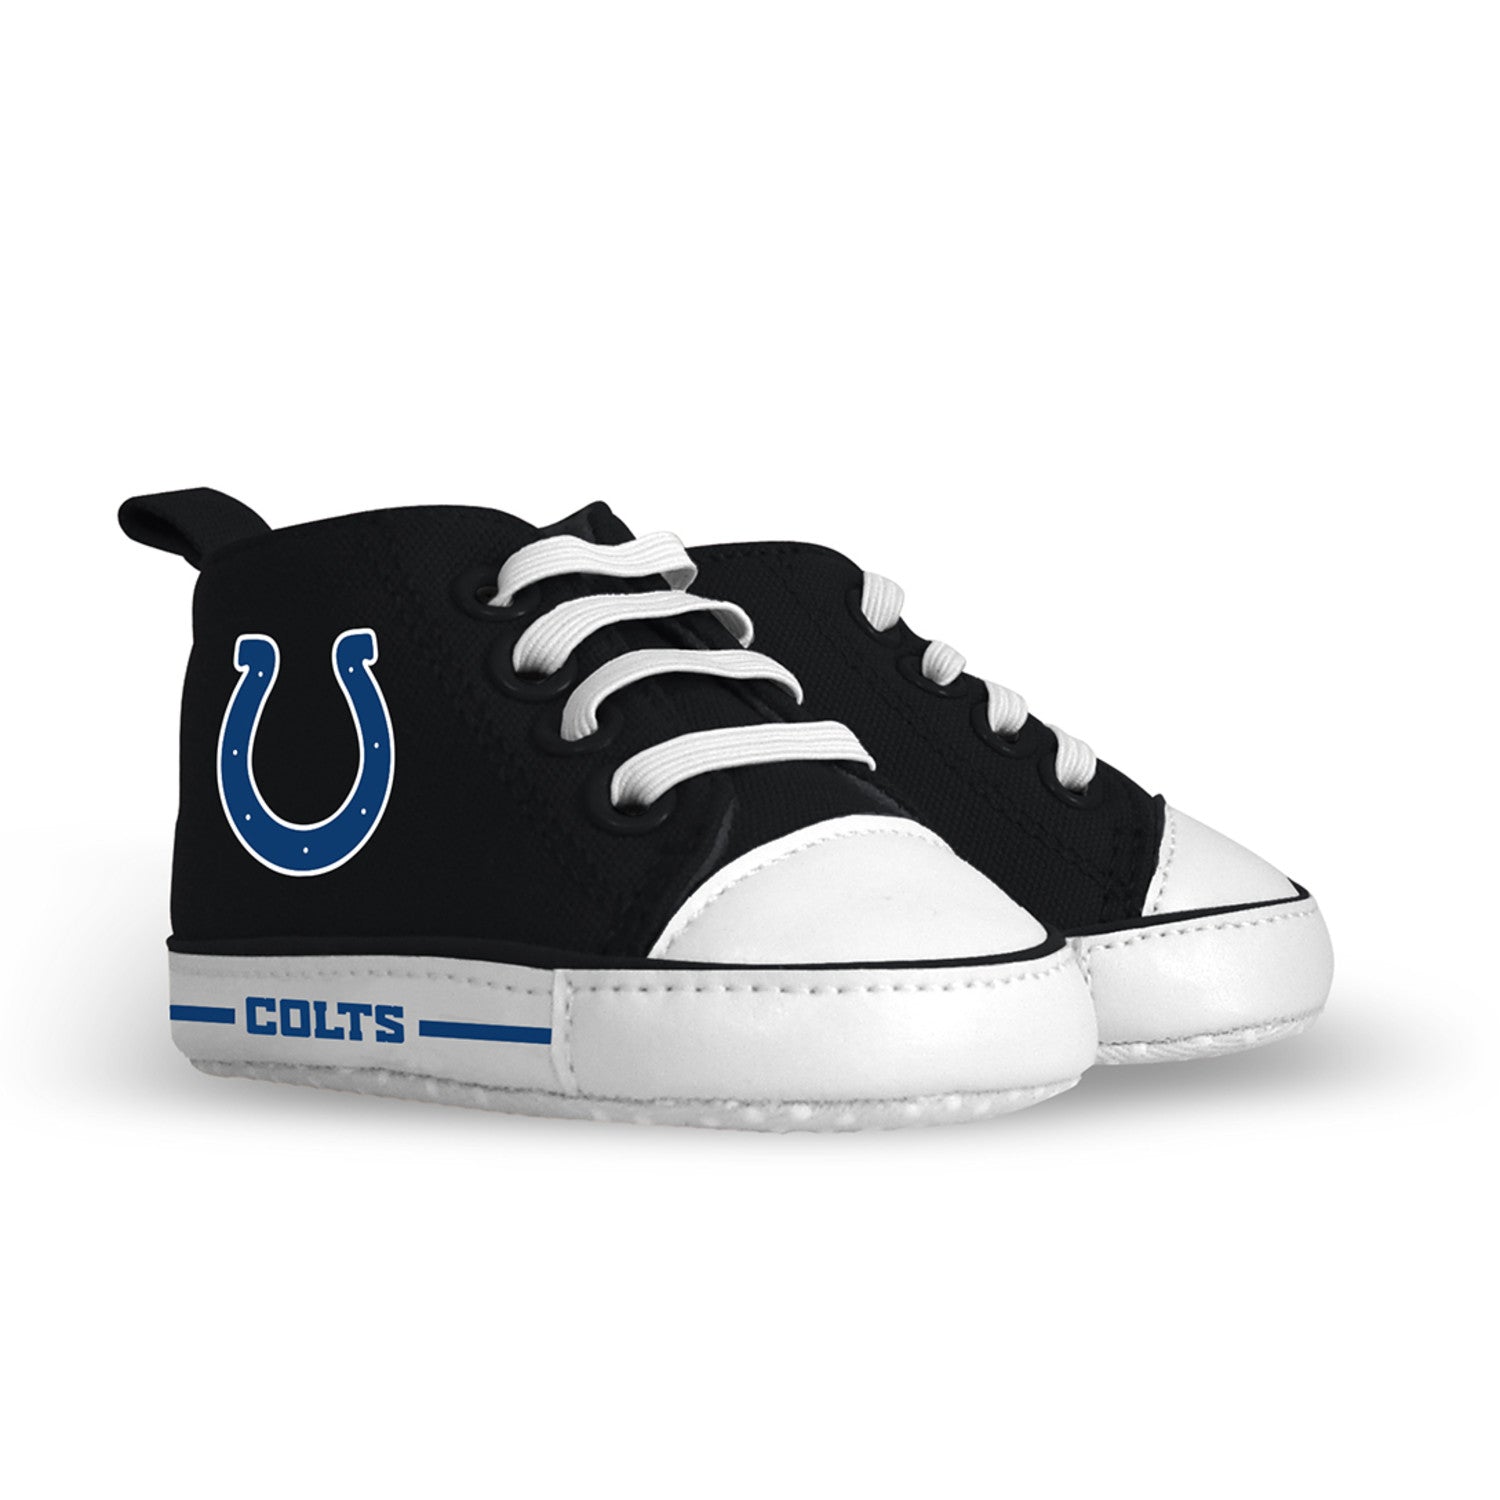 Indianapolis Colts Baby Shoes